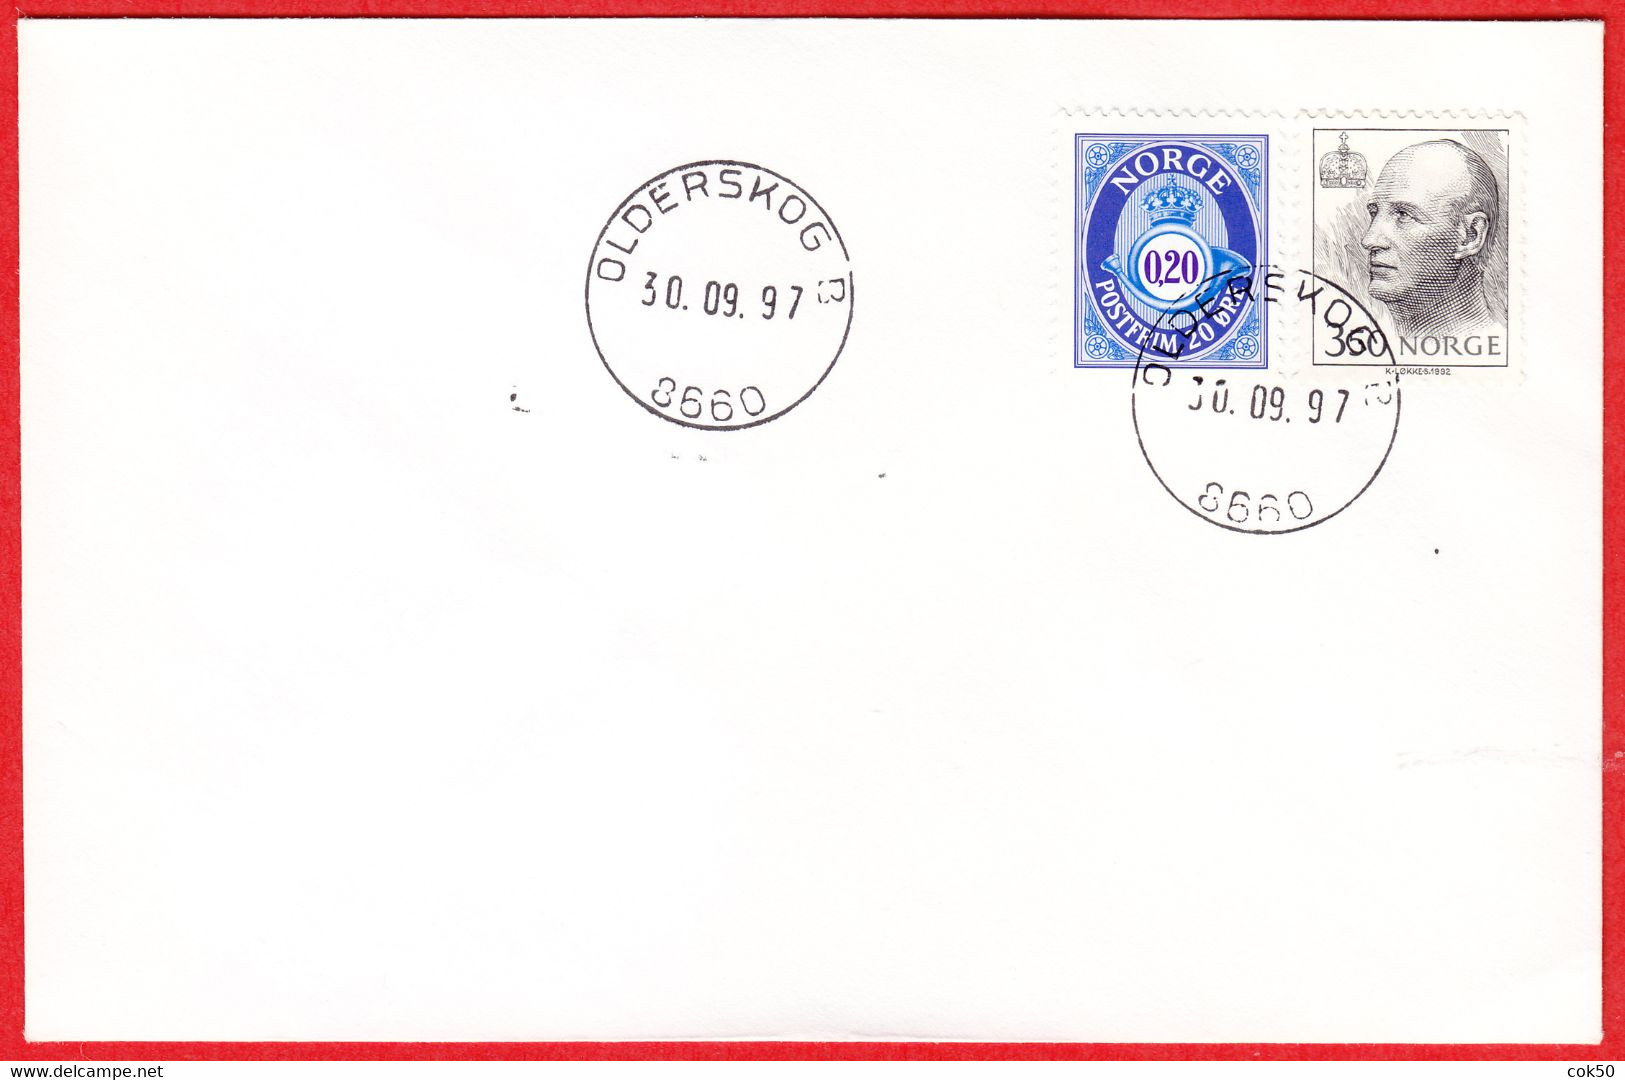 NORWAY -  8660 OLDERSKOG B - 24 MmØ - (Nordland County) - Last Day/postoffice Closed On 1997.09.30 - Local Post Stamps